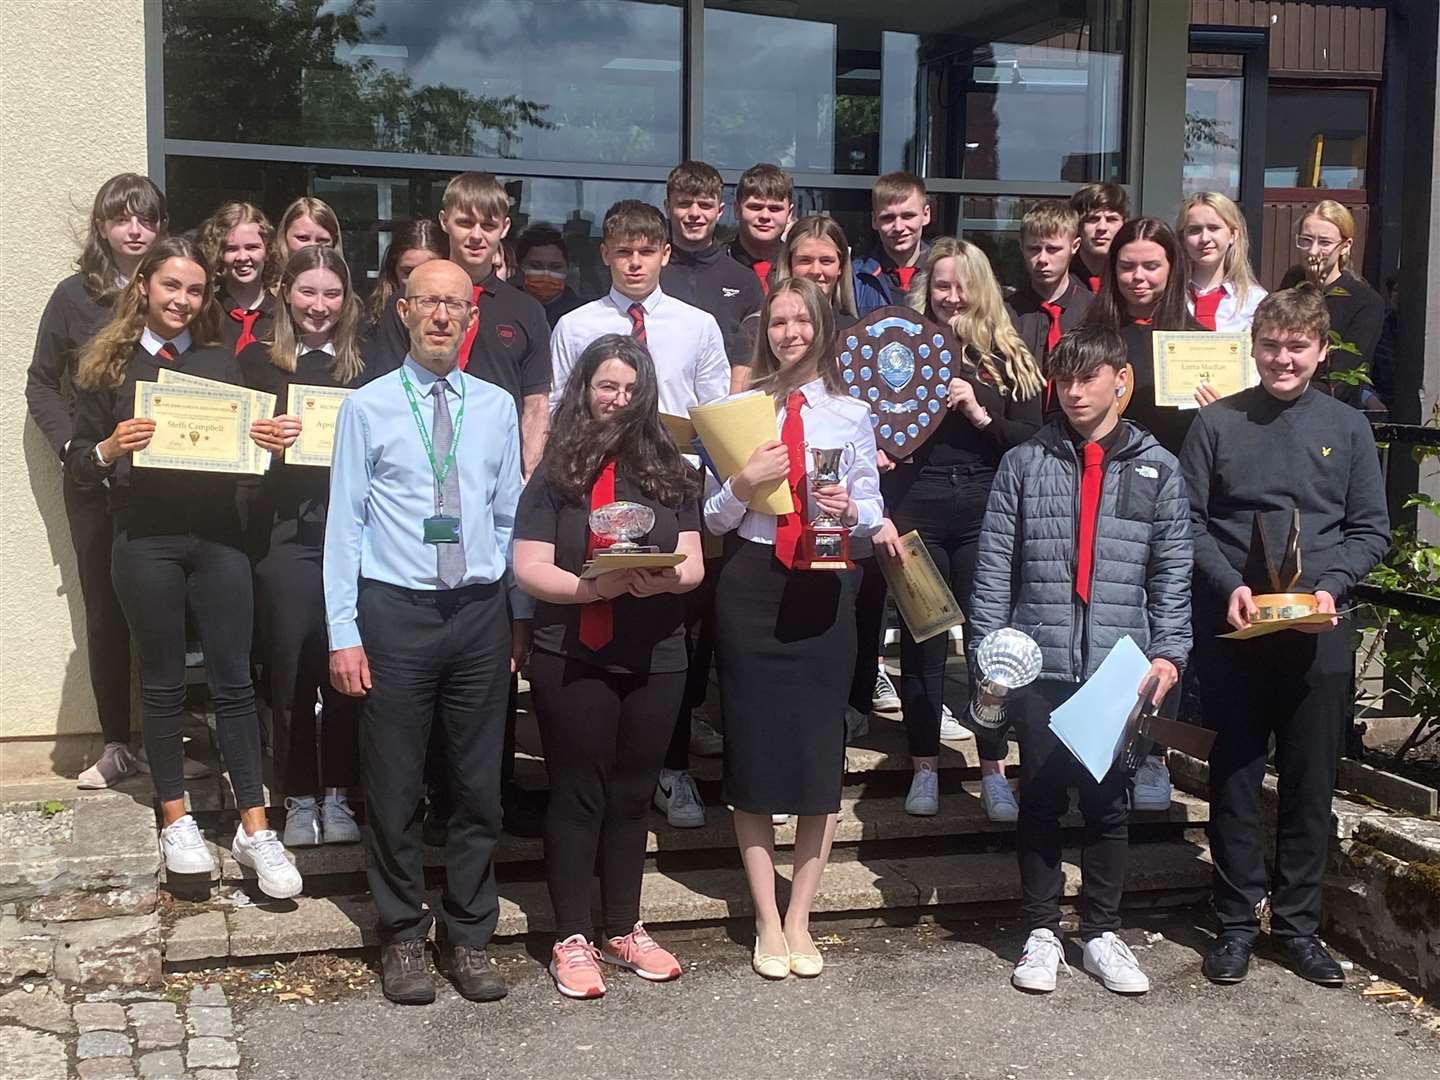 Senior pupils show off their certificates and awards following the prize-giving.